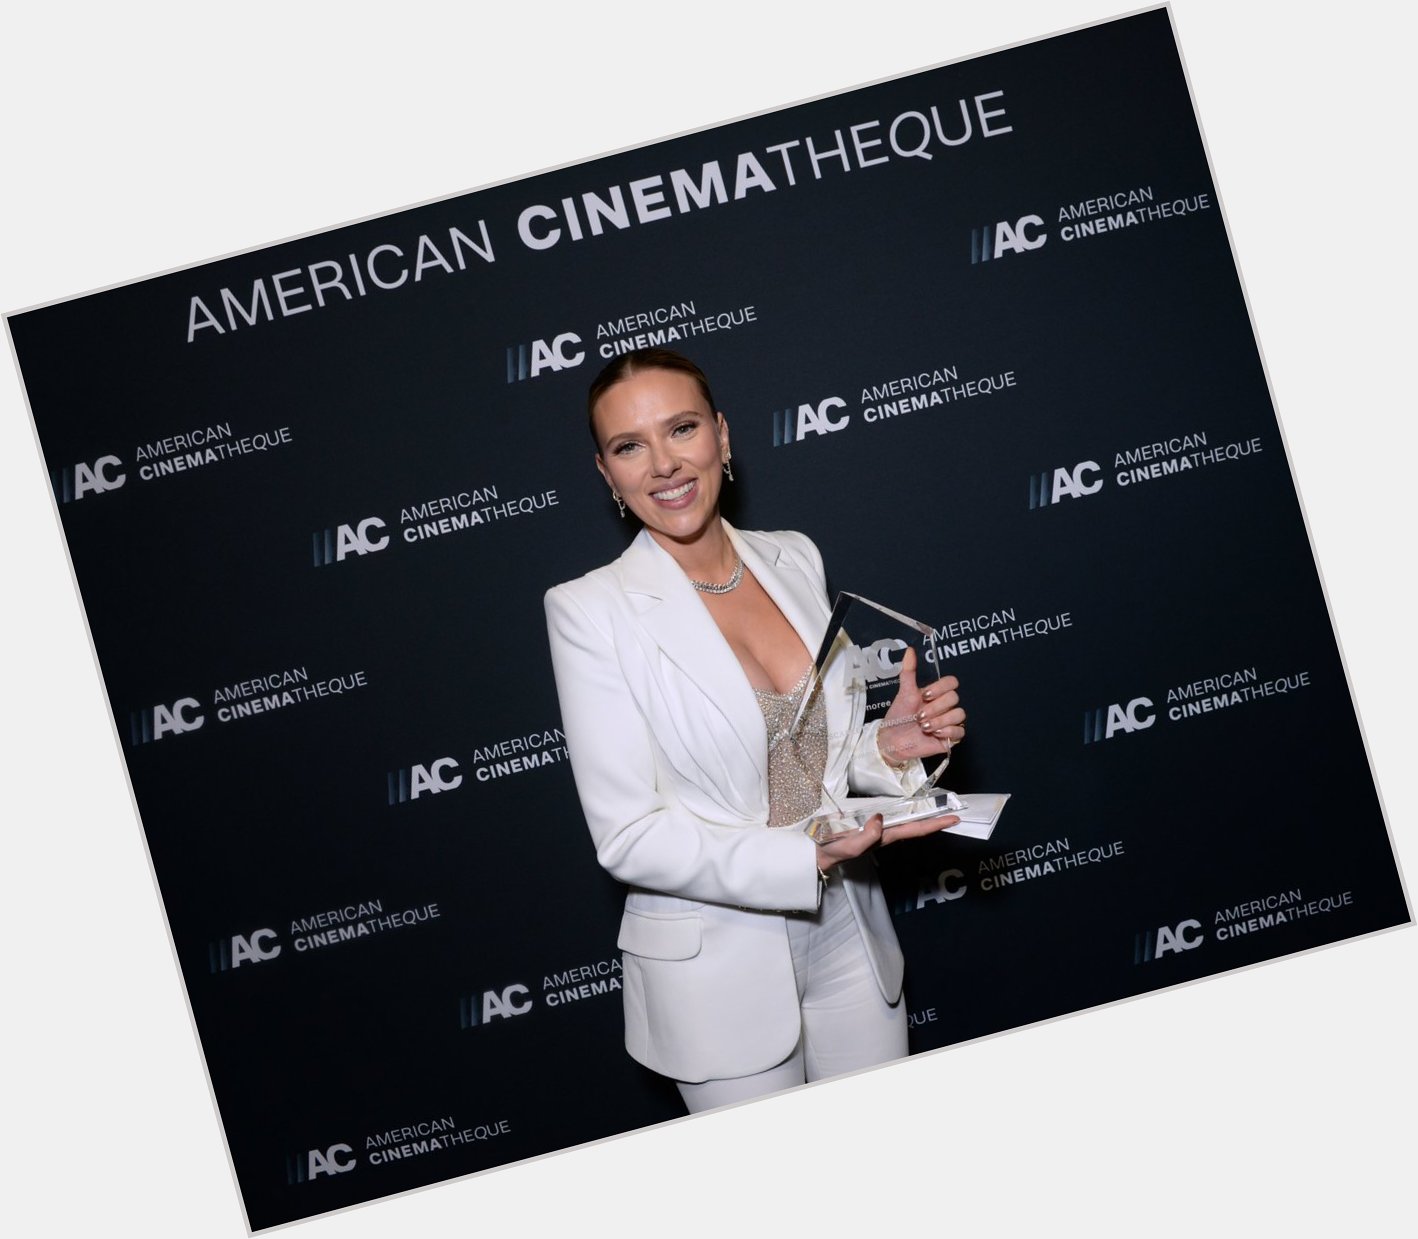 Wishing a very happy birthday to our 35th Annual American Cinematheque Awards honoree Scarlett Johansson! 